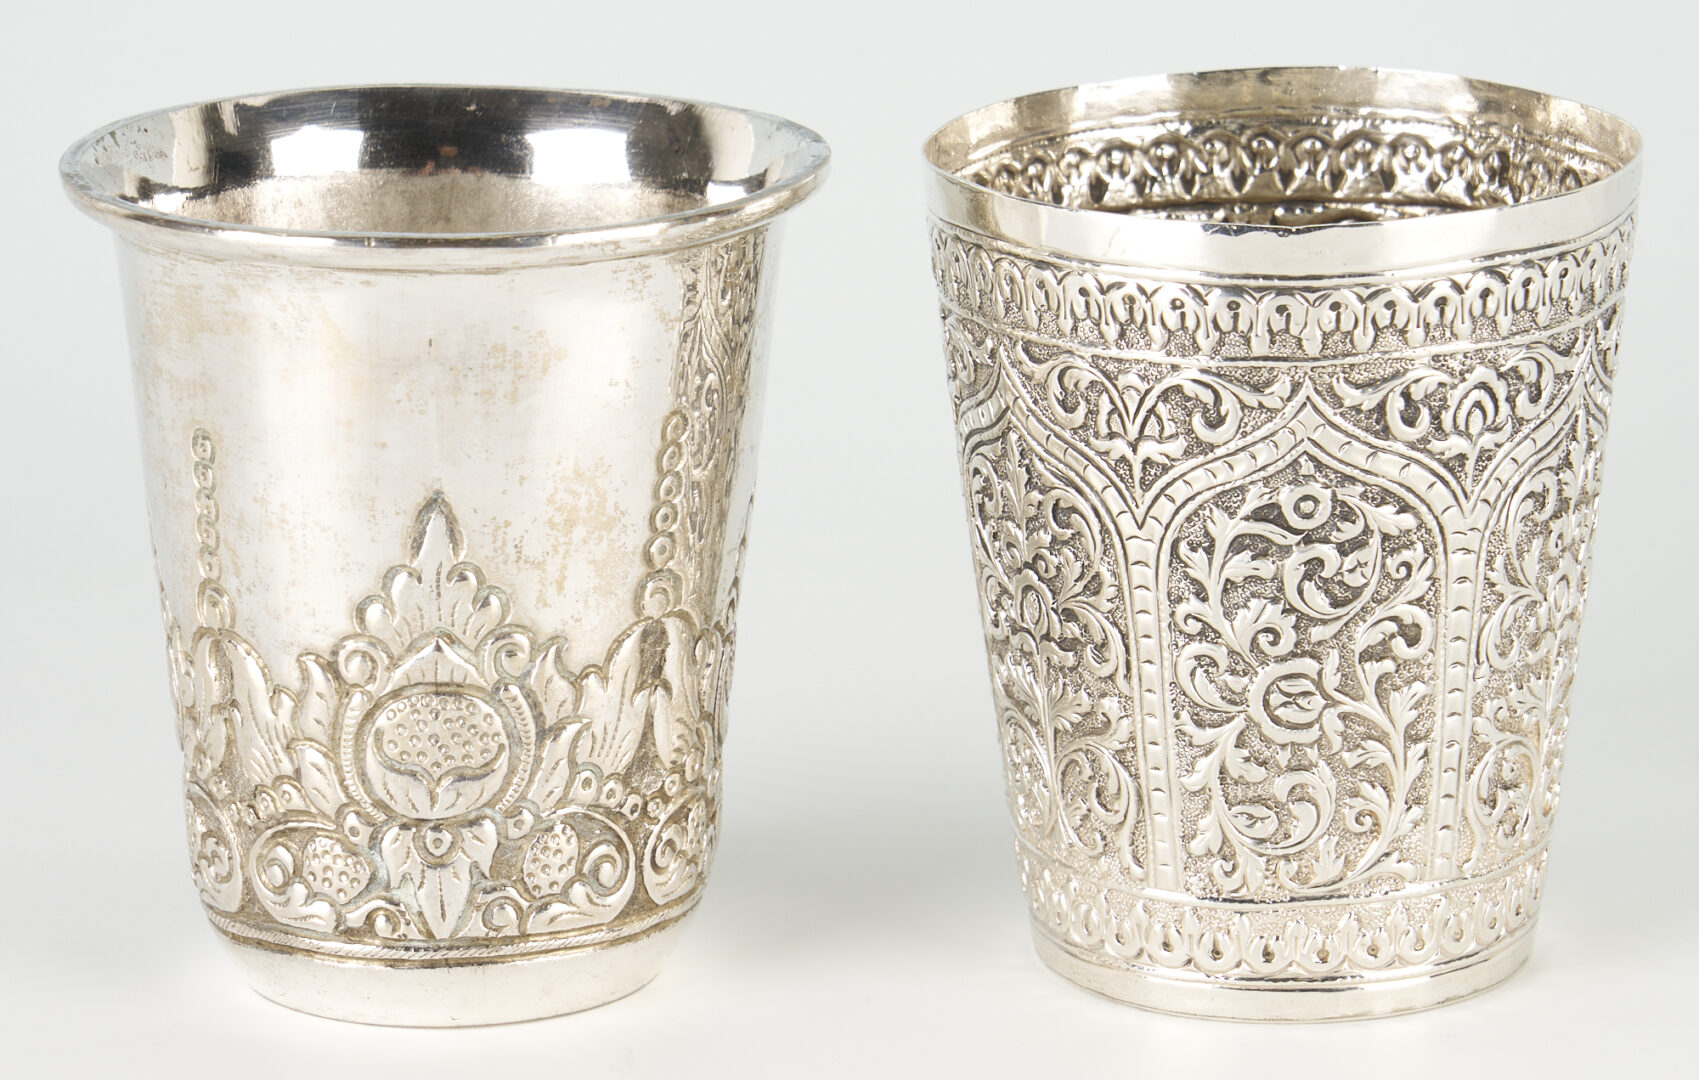 Lot 2: 4 Asian silver cups including Rifle Presentation Trophy Cup